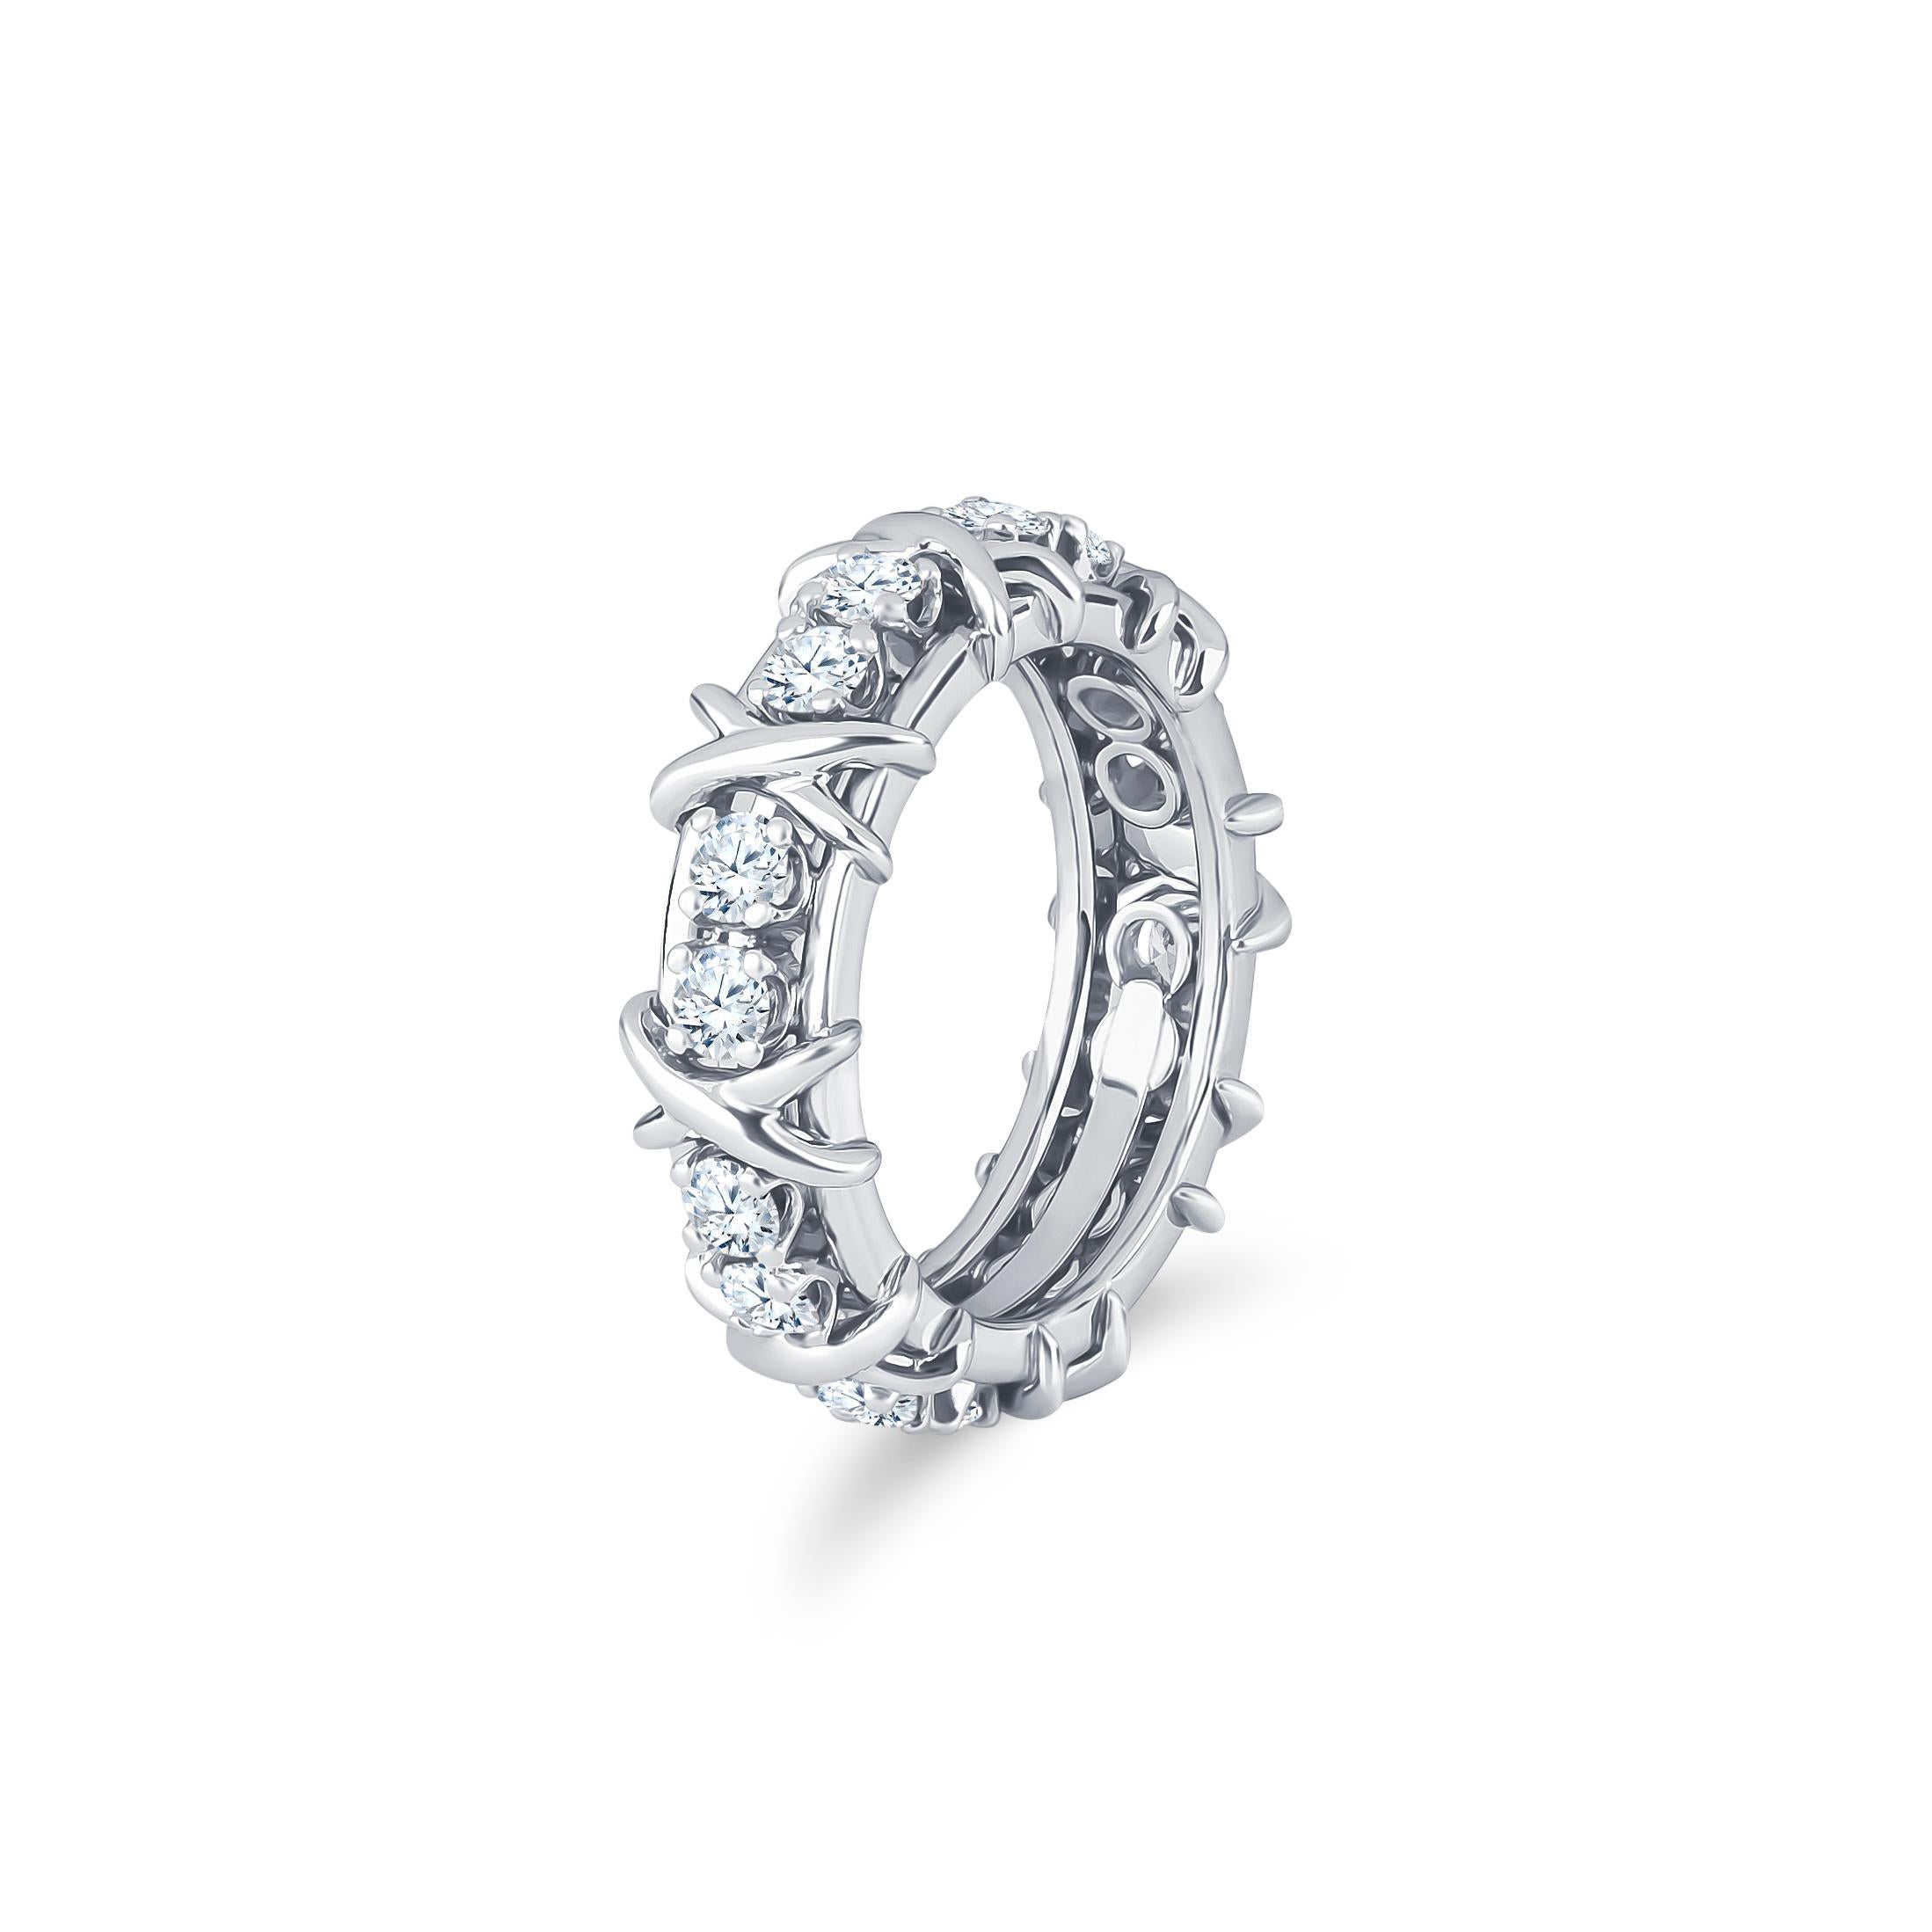 Tiffany & Co Schlumberger platinum band with 16 round diamonds all around, approximately 1.33 carat total weight. Ring size 6.